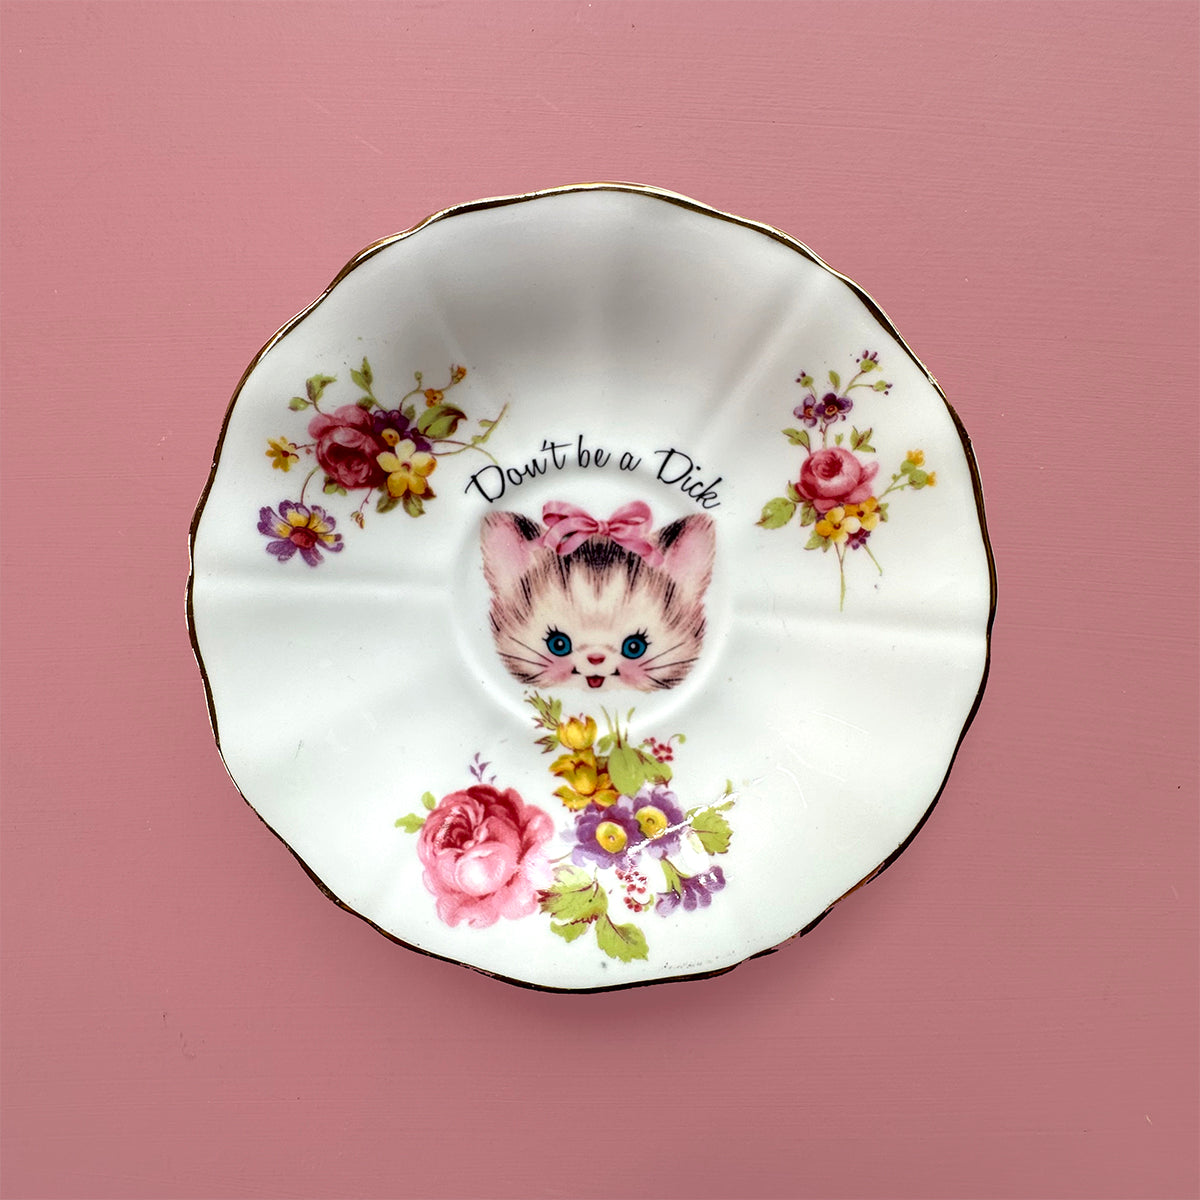 Vintage SMALL Saucer Plate - Cat Art Plate - "Don't be a Dick."